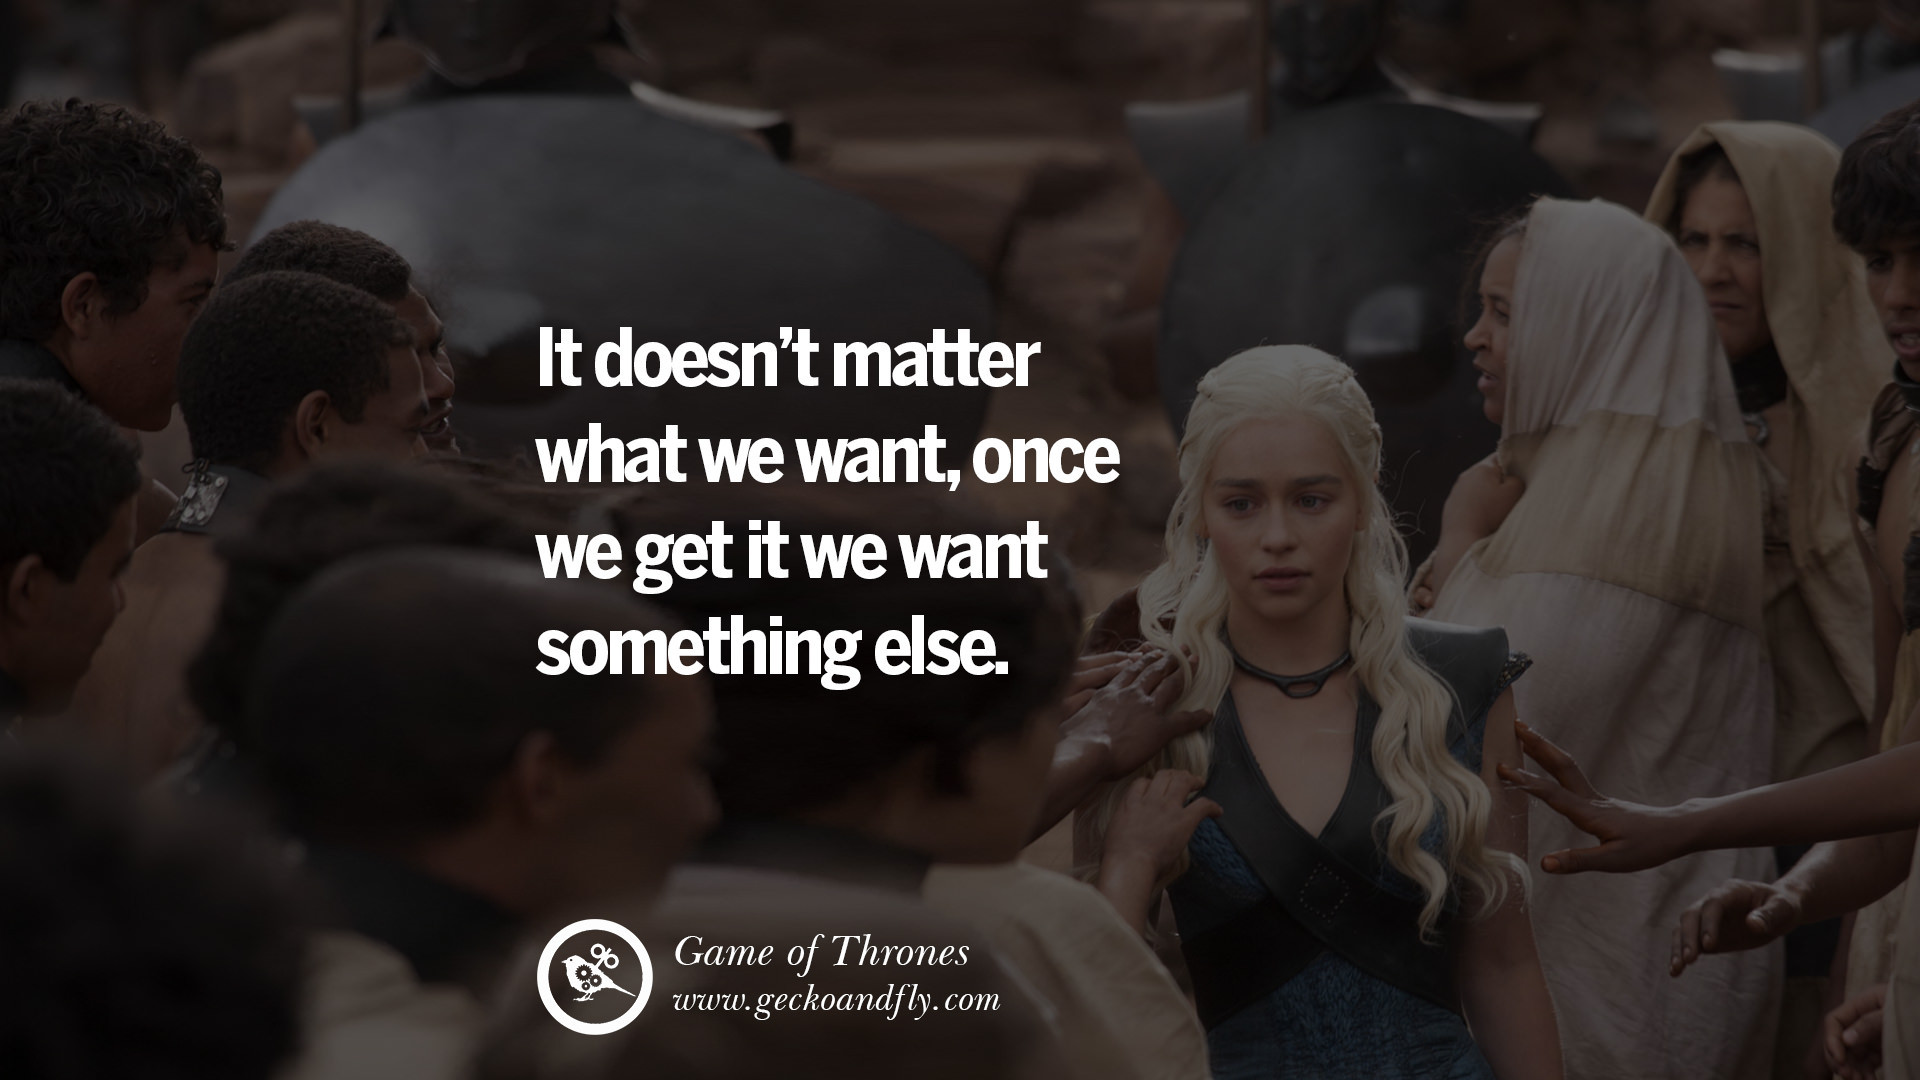 Game Of Thrones Romantic Quotes
 15 Memorable Game of Thrones Quotes by George Martin on